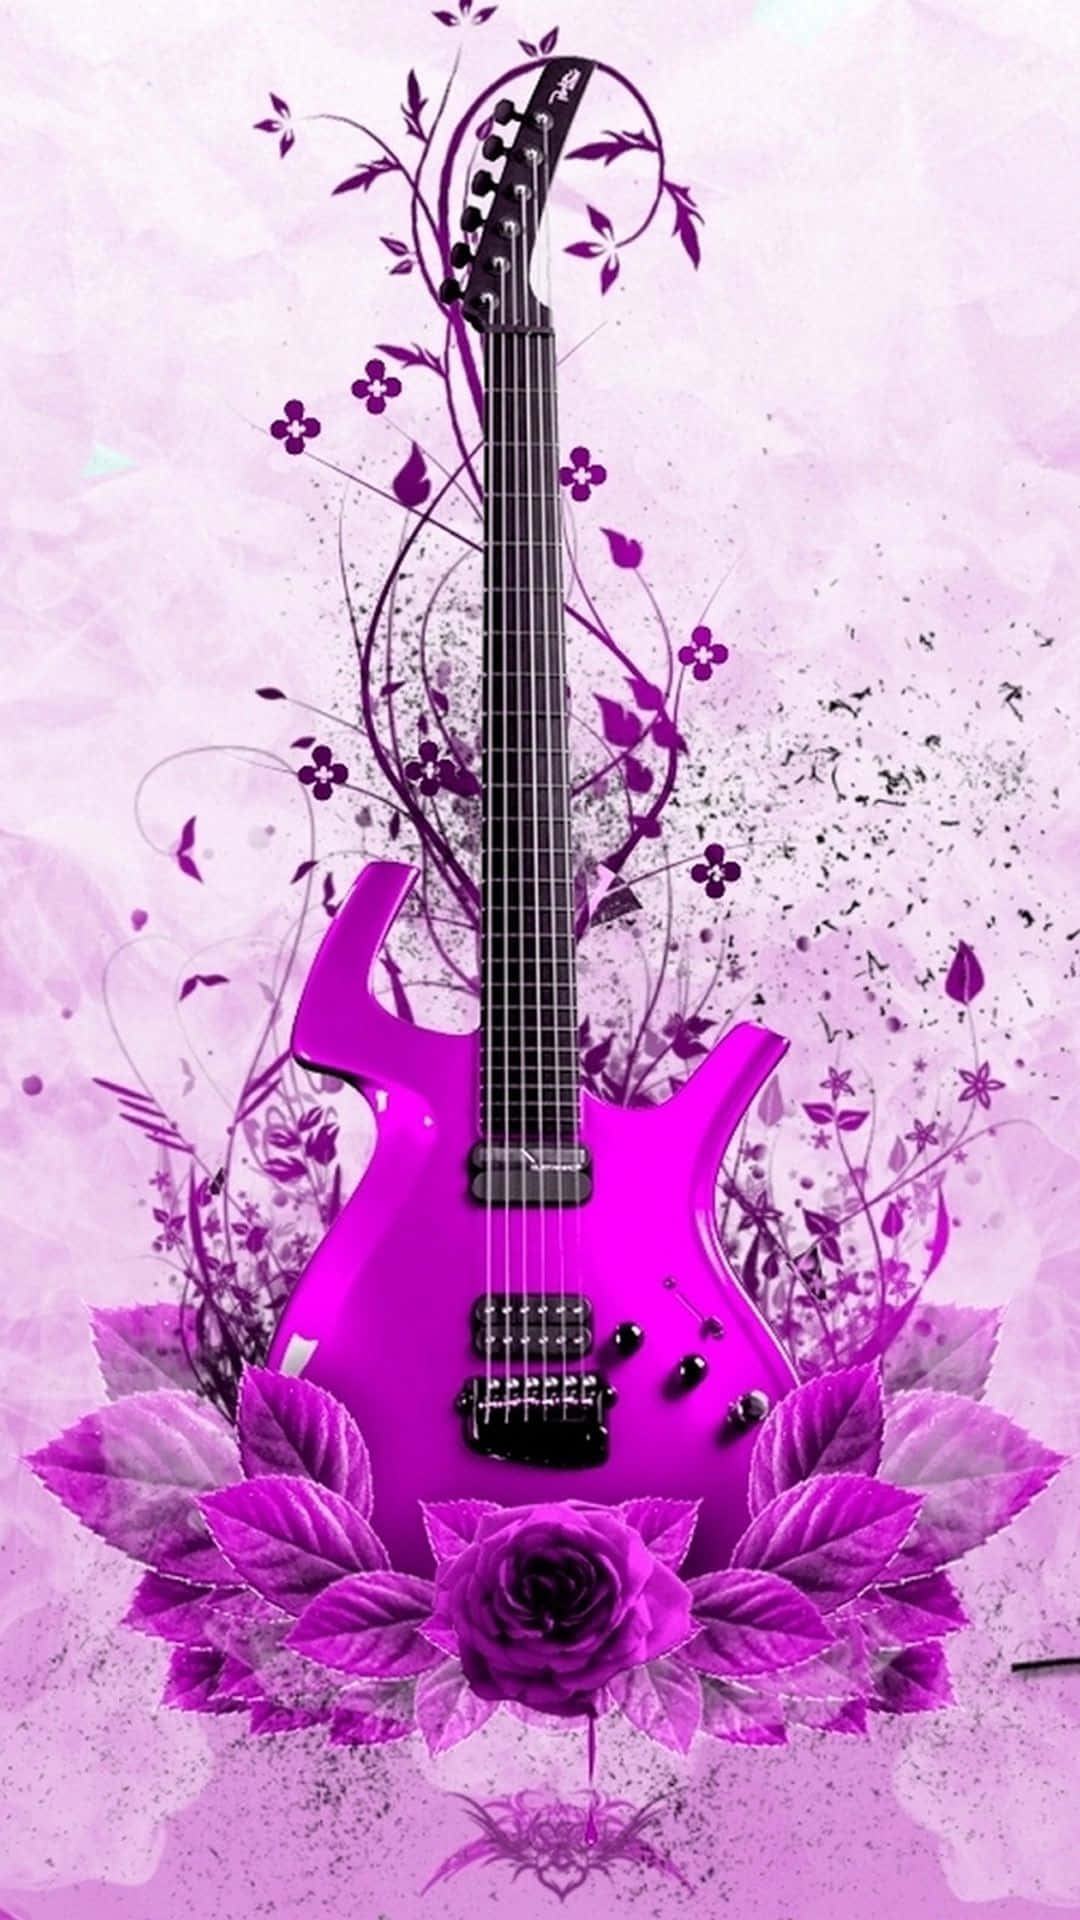 Abstract Pink Musical Instrument Electric Guitar With Flowers Wallpaper